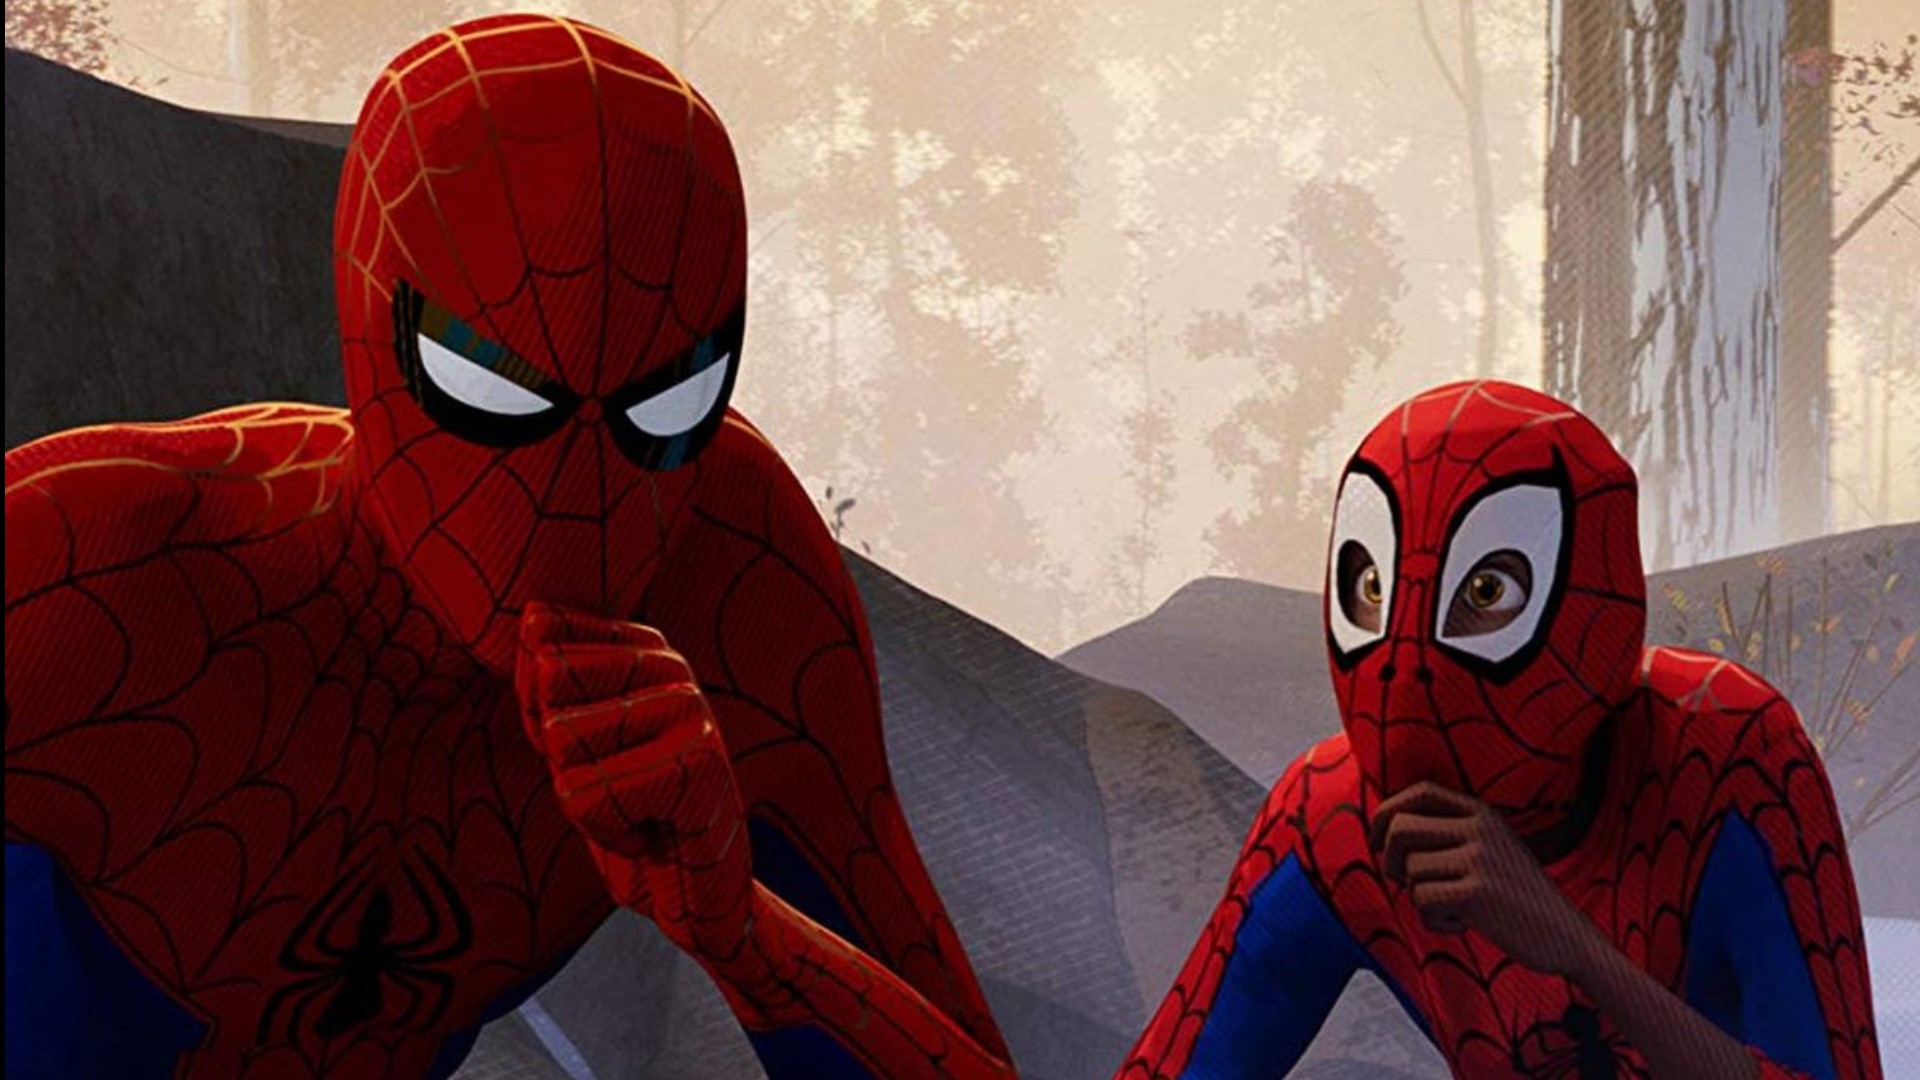 'Spider-Man: Into the Spider-Verse,' 'Mary Poppins Returns,' and more new movies are available on all formats at home. Director Shawn Hobbs has the latest list of new movies to add to your binge-list.